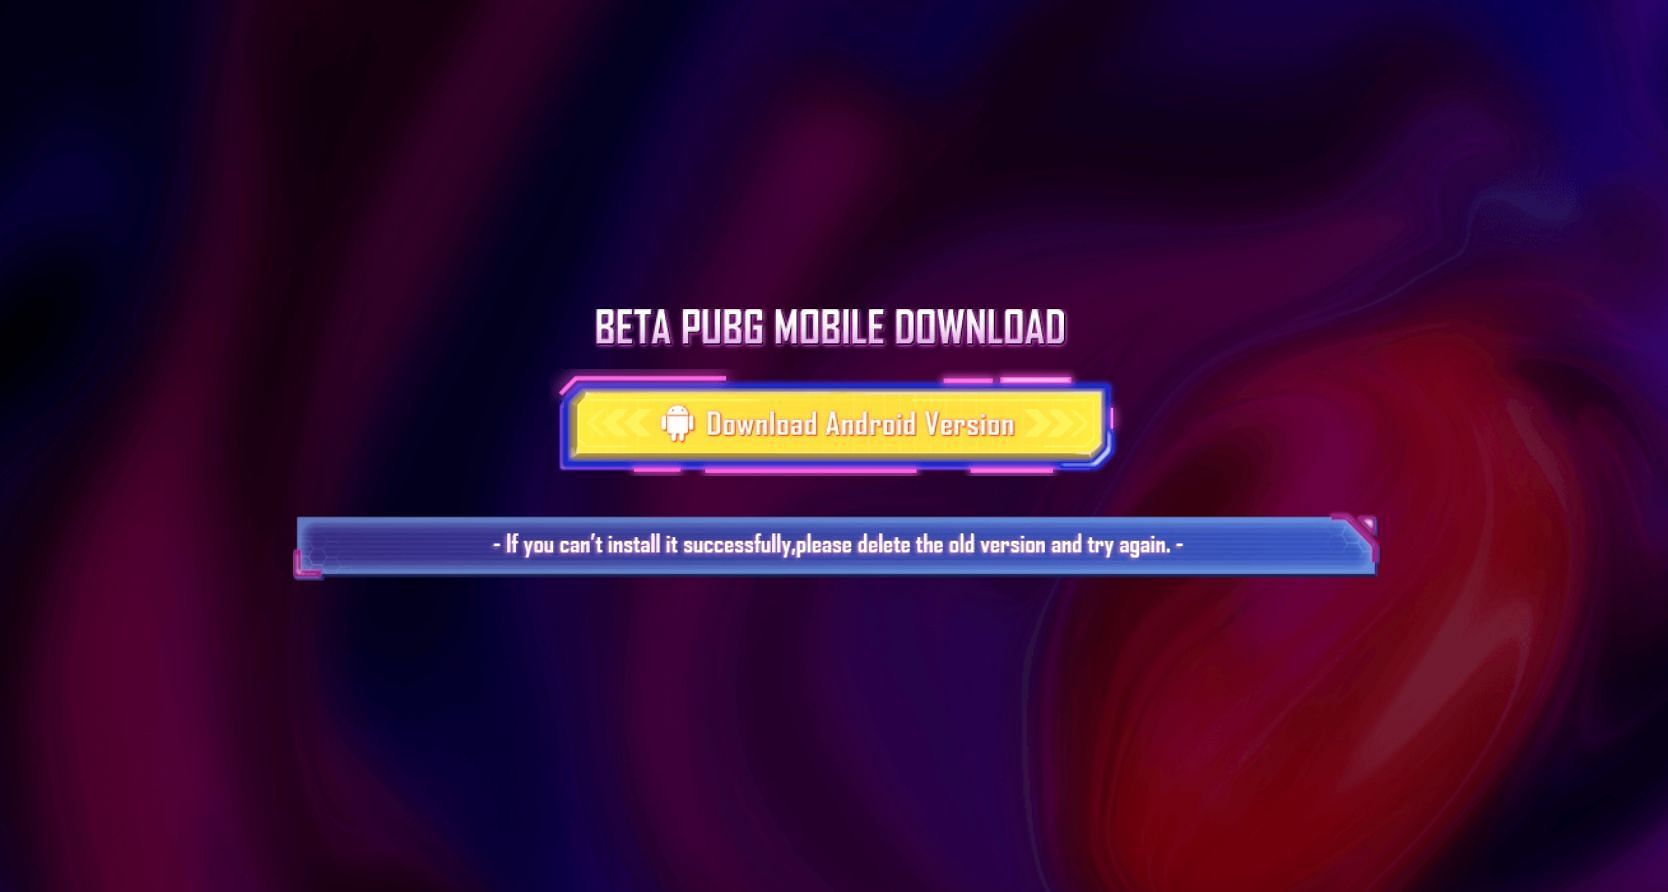 How to download PUBG Mobile 2.4 beta update on Android devices